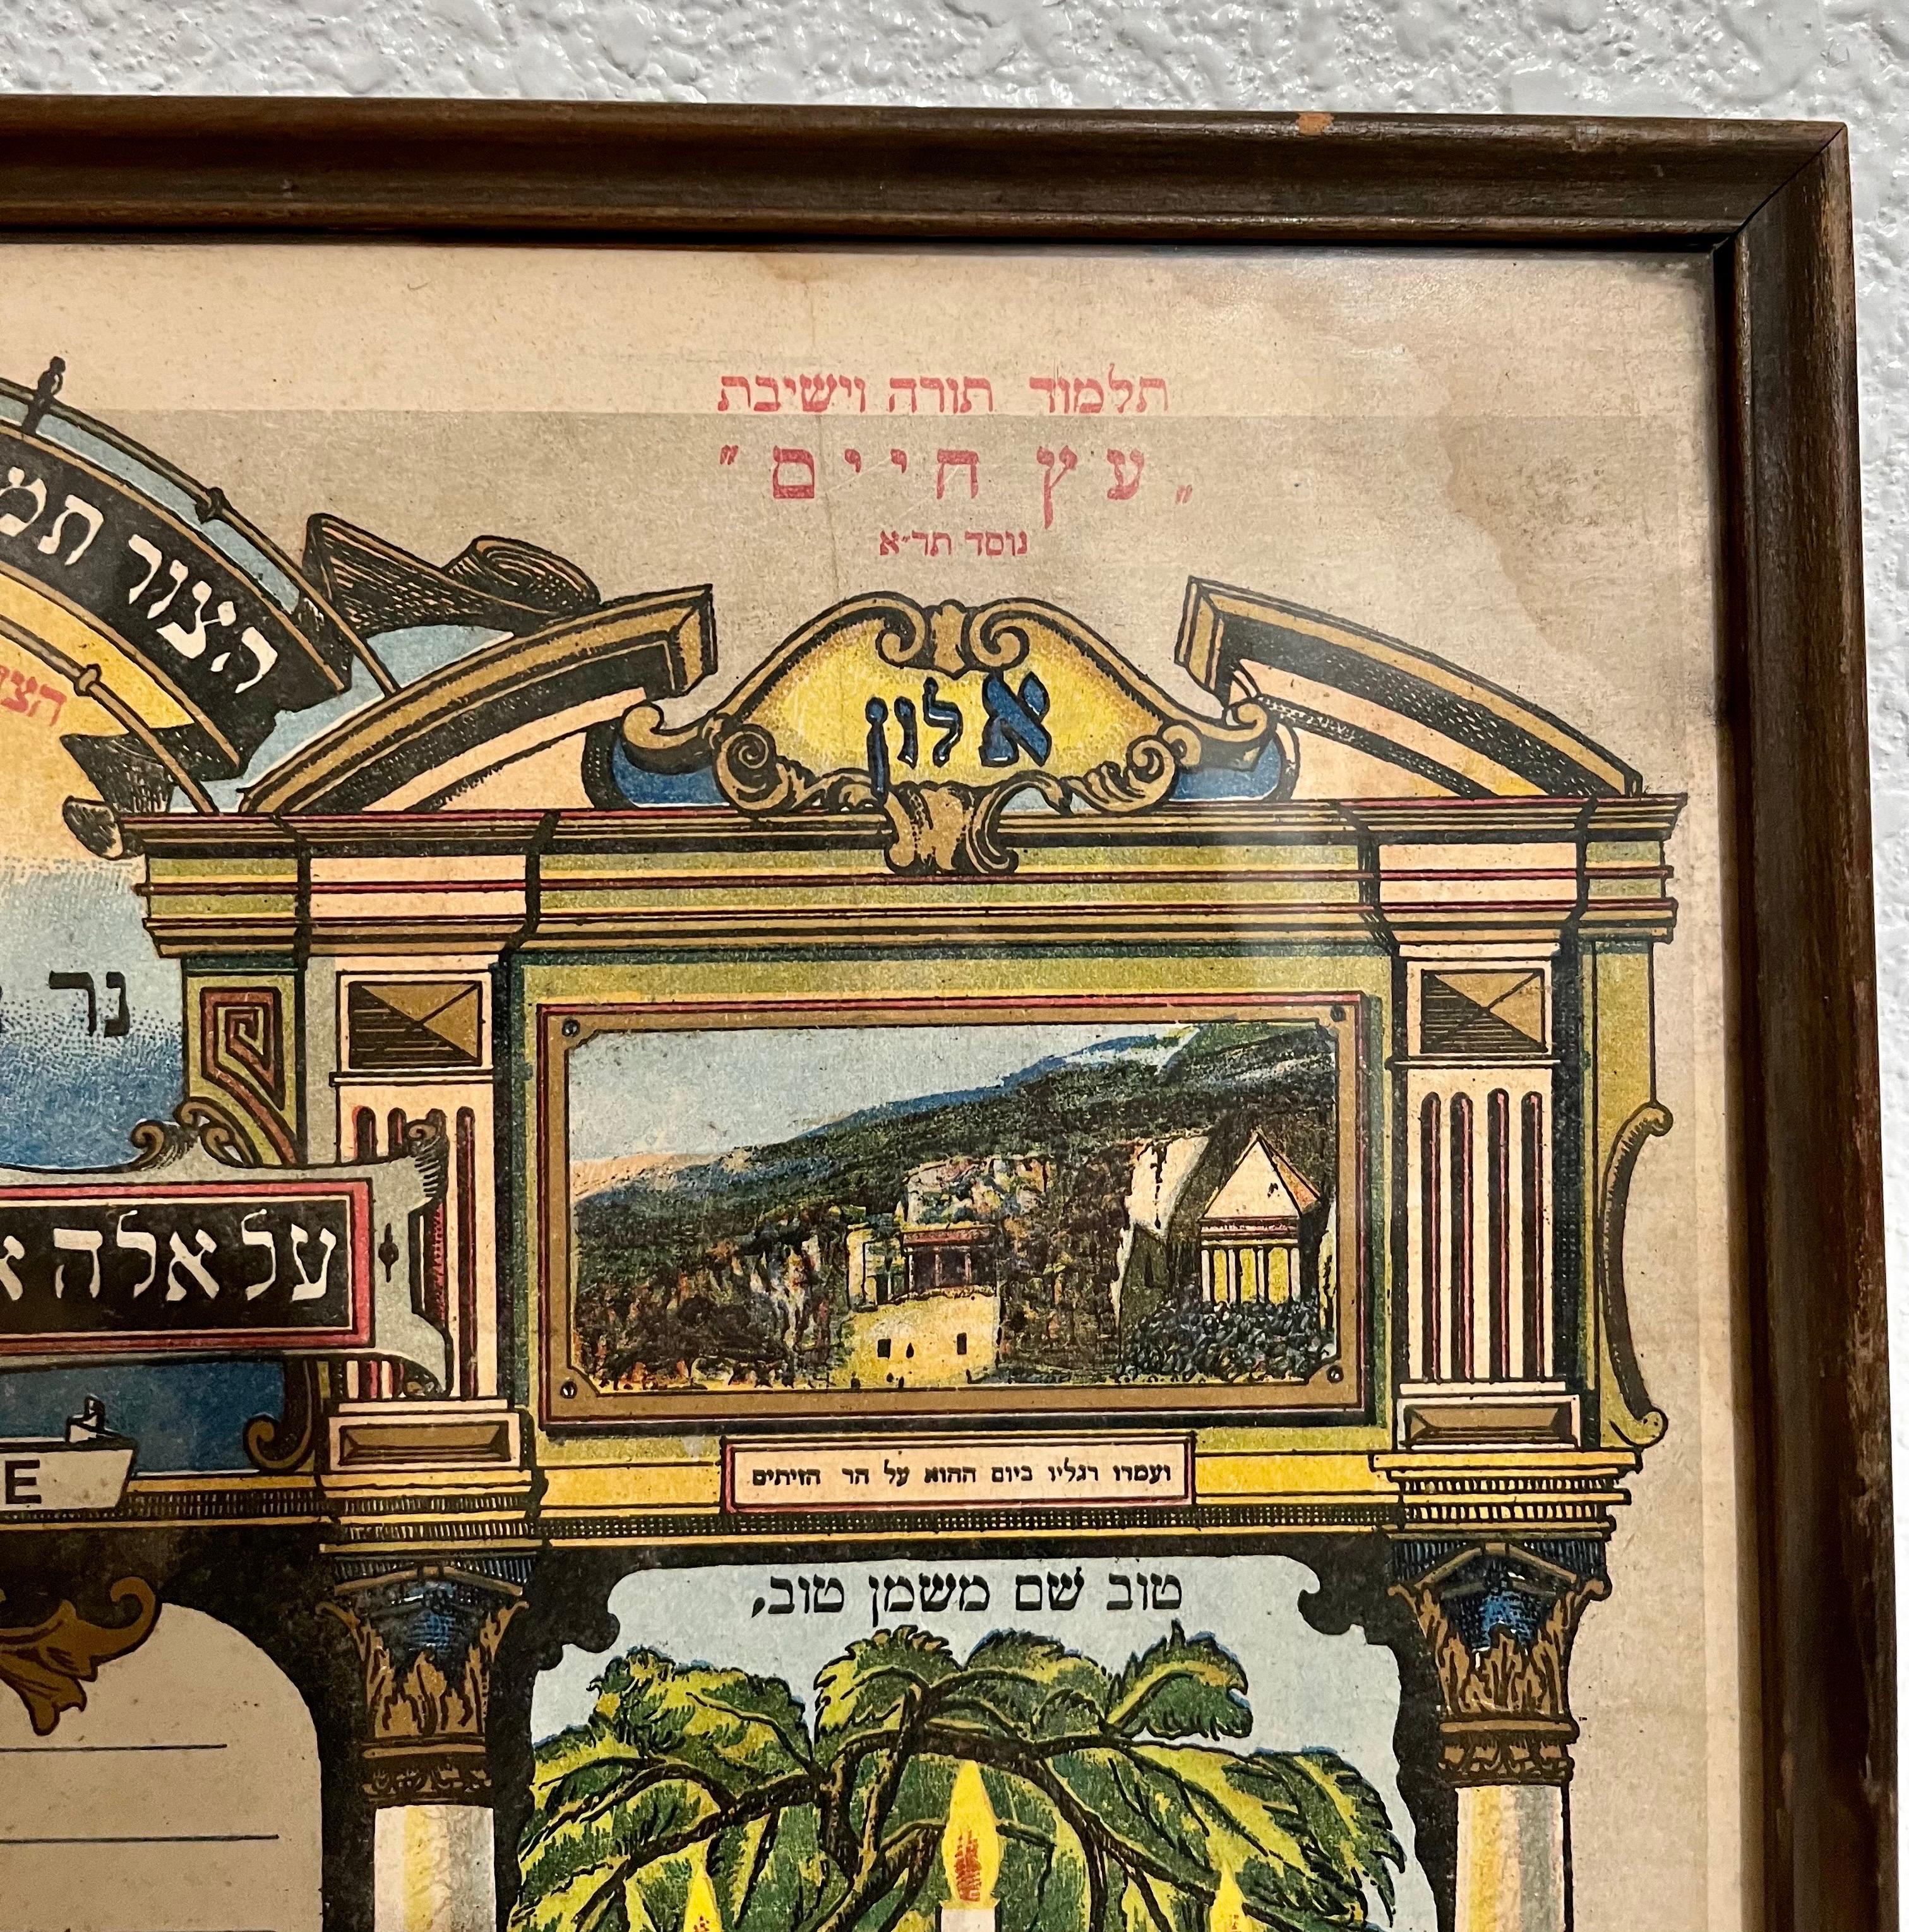 Circa 1890-1920. This Neoclassical, Judaic, Egyptian revival, Orientalist Mizrach sign, was produced in British Mandate Palestine by the chromolithograph process at the beginning of the 20th century. It pictures vignettes of holy places. with a hand